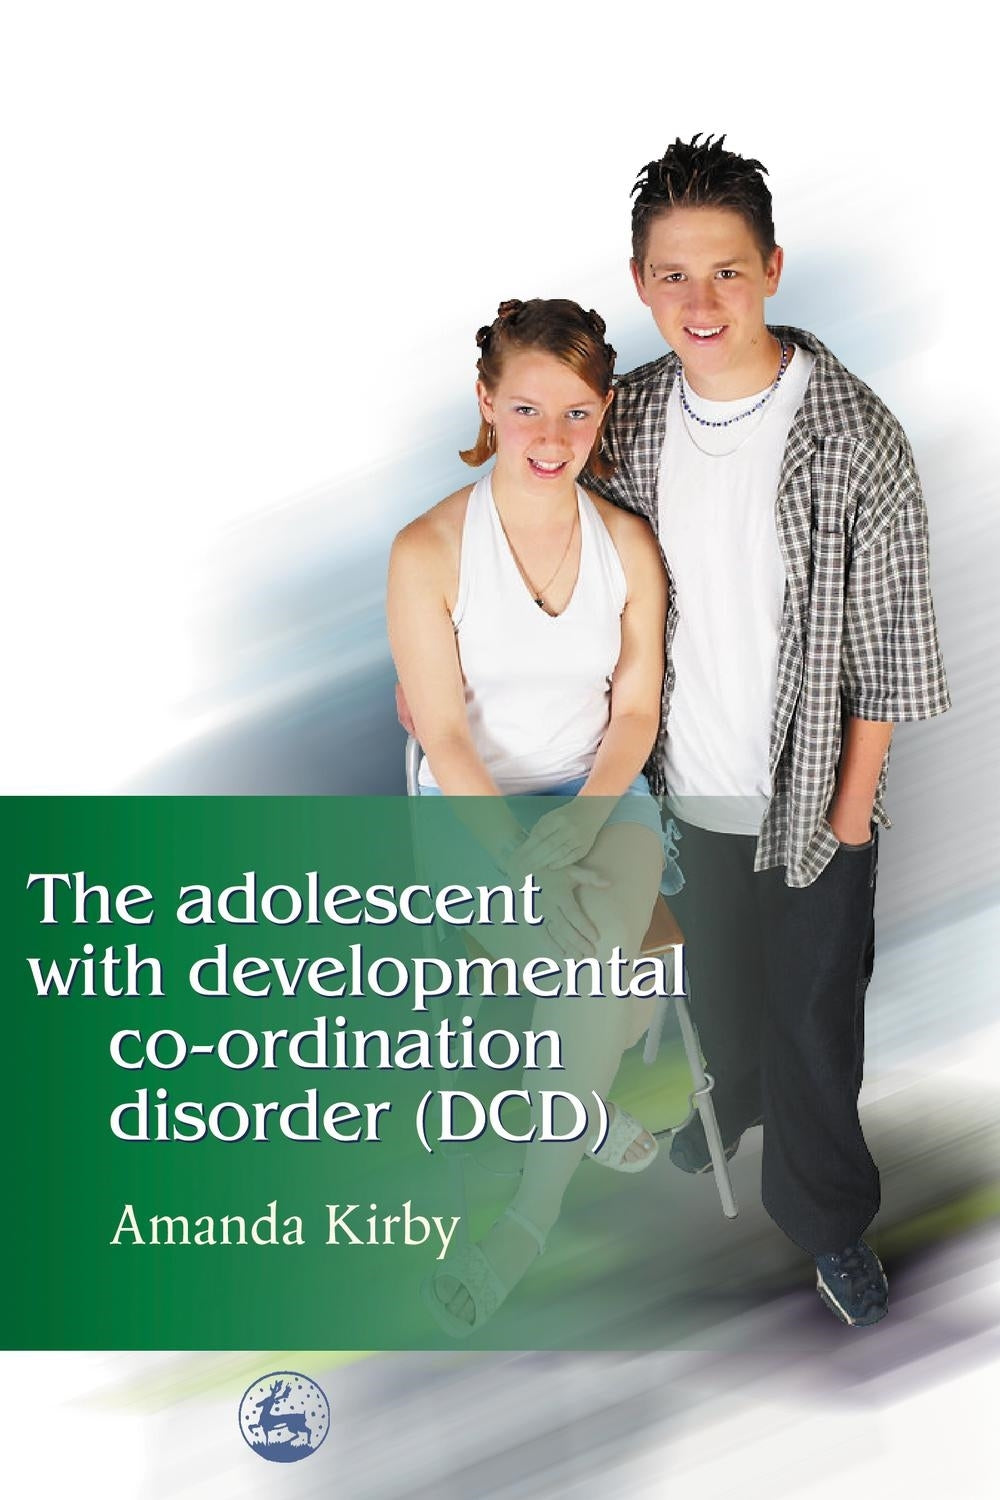 The Adolescent with Developmental Co-ordination Disorder (DCD) by Amanda Kirby